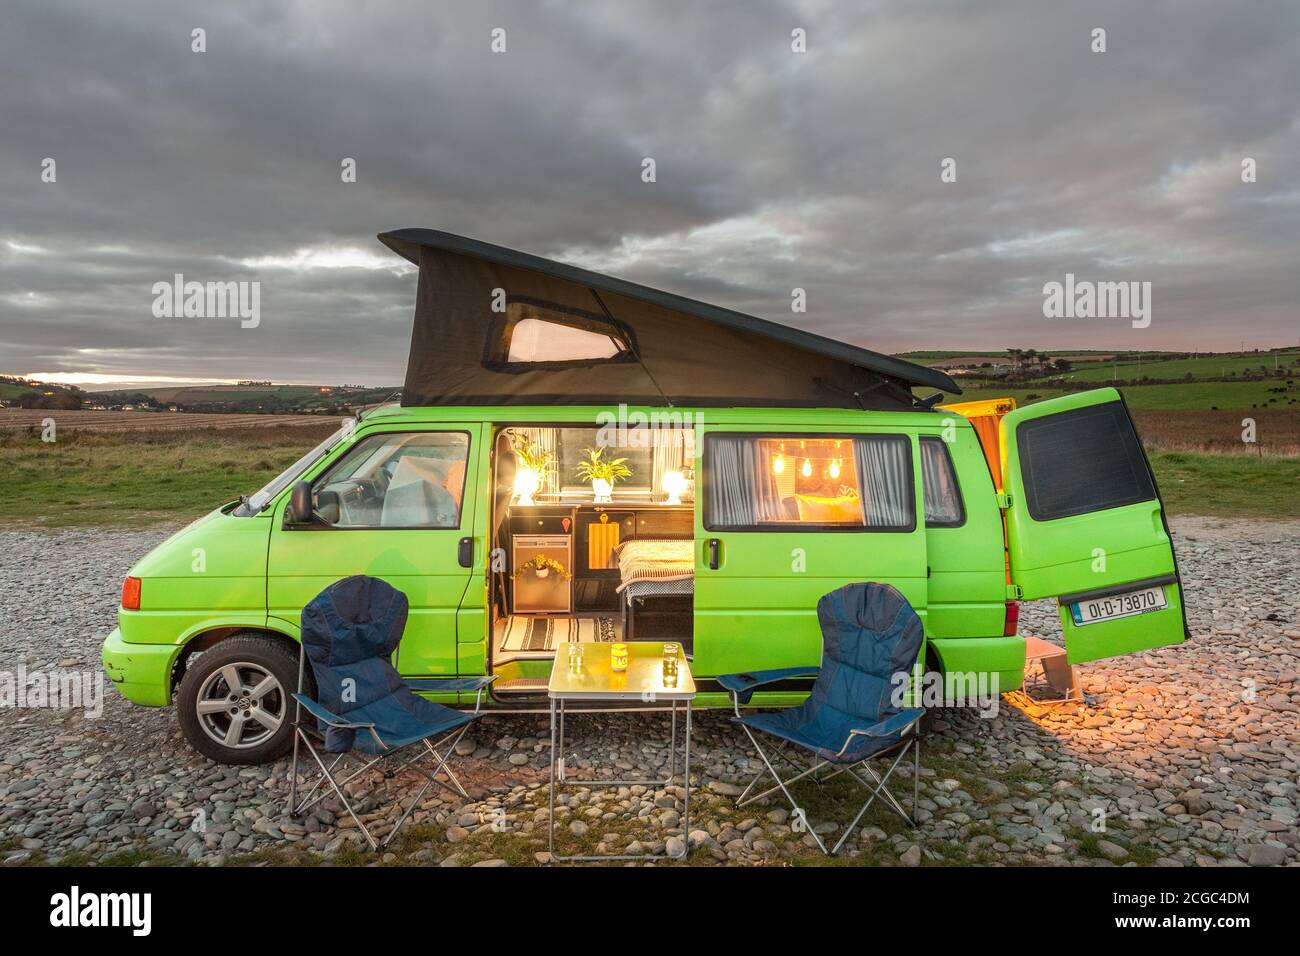 Vw Camper Type 4 High Resolution Stock Photography and Images - Alamy